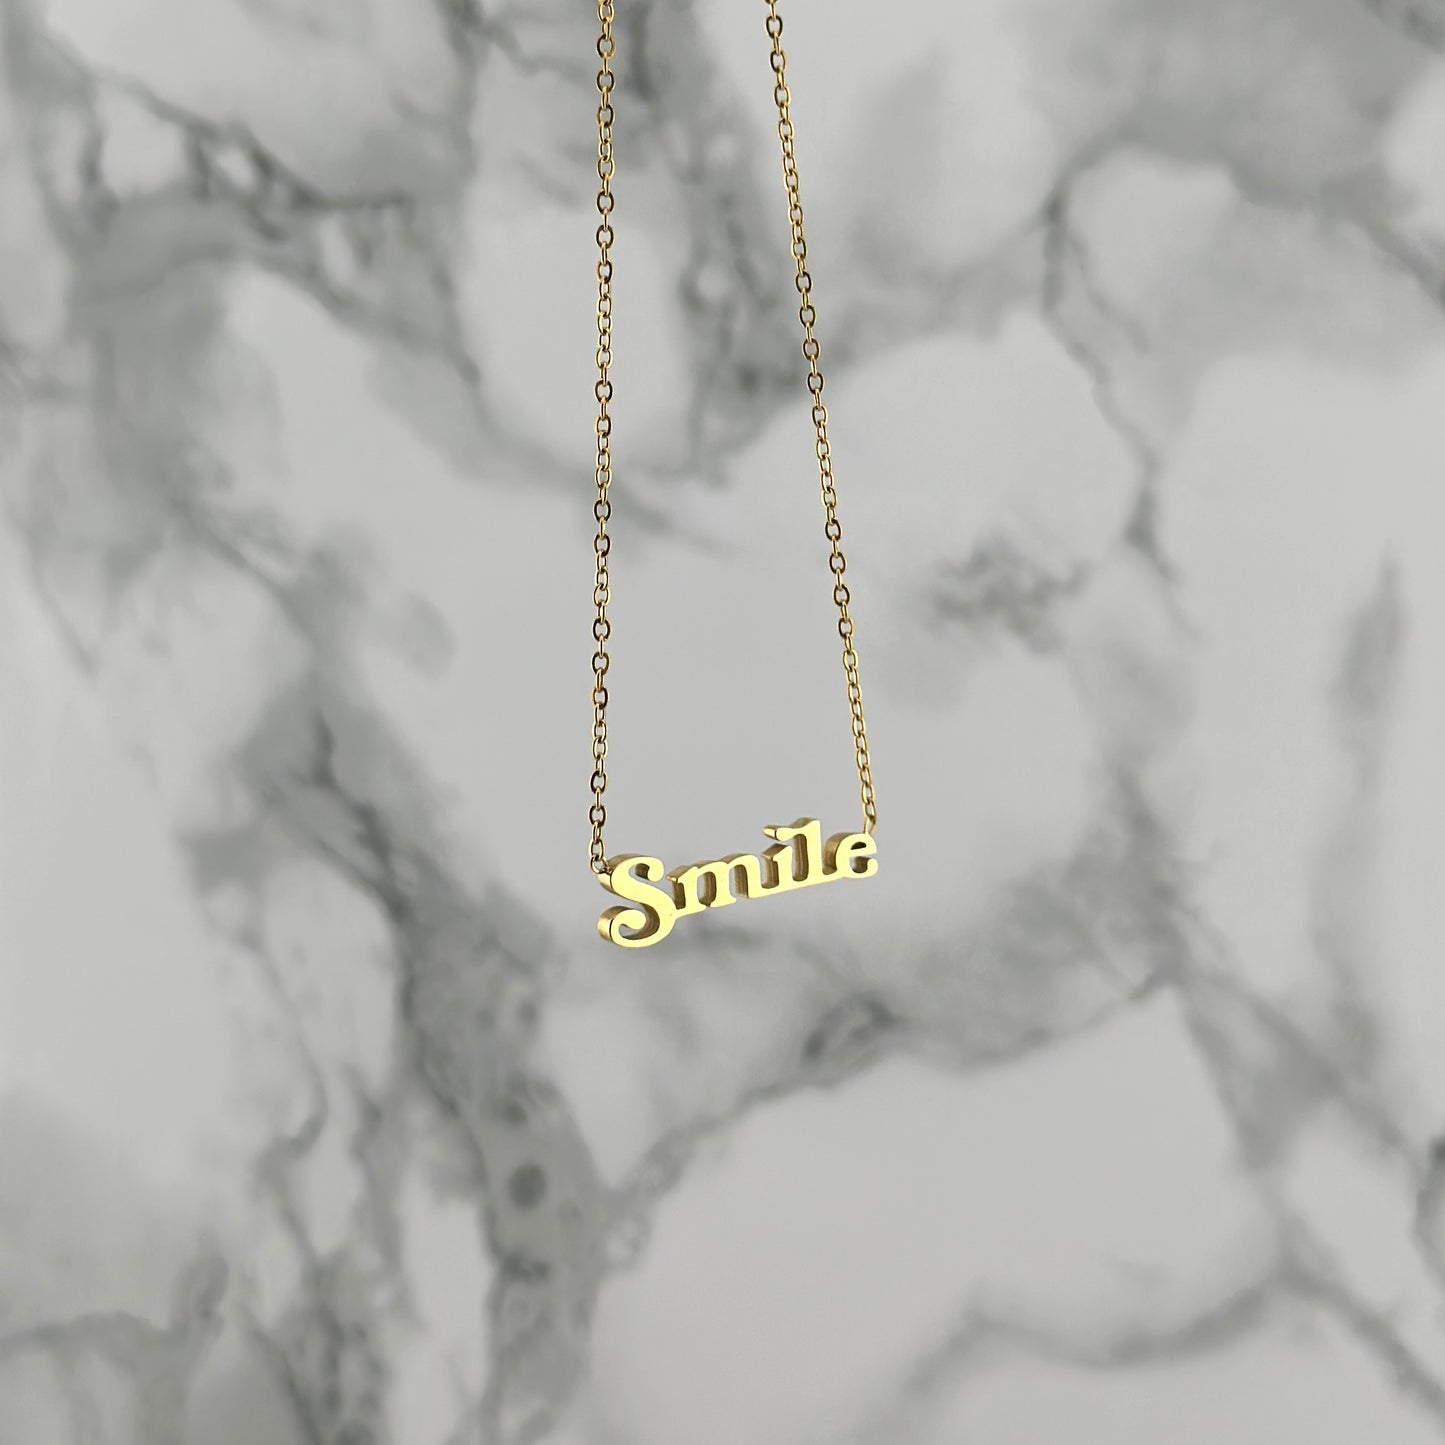 Smile necklace